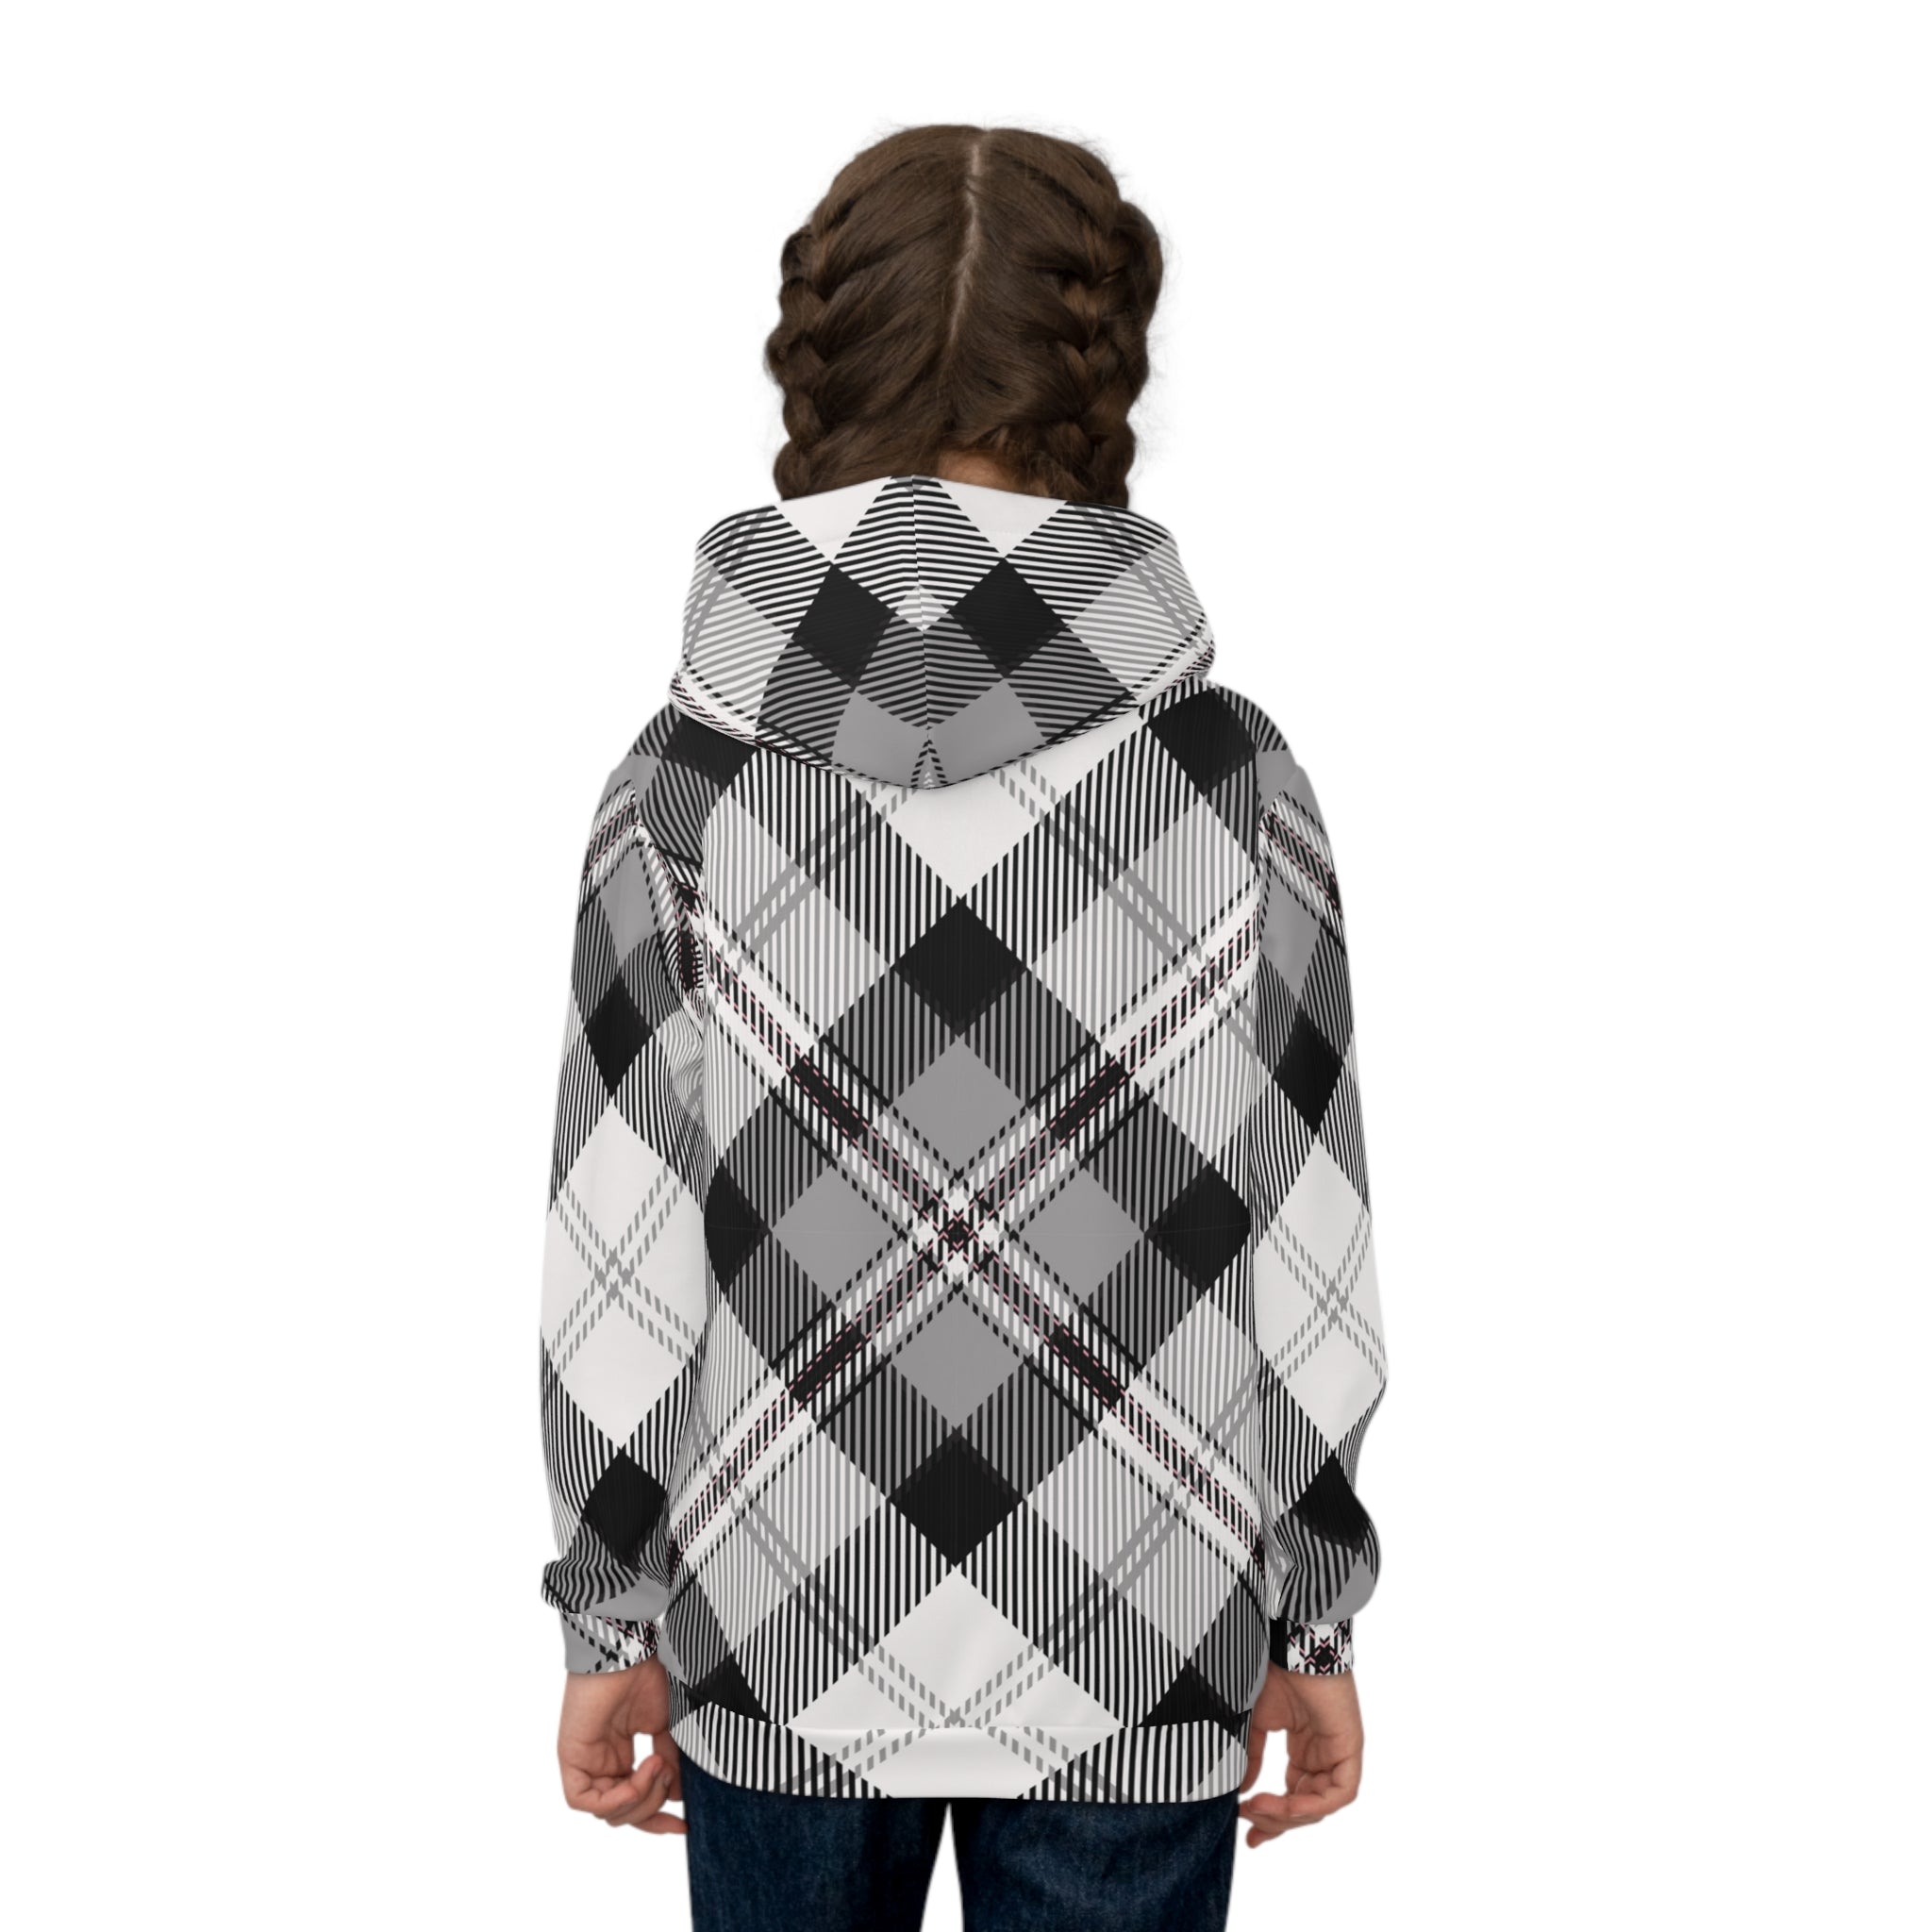 Grey Plaid and Pink Stripe Children's Hoodie, Pullover Sweater for Children, Kids Fashionwear All Over Prints  The Middle Aged Groove